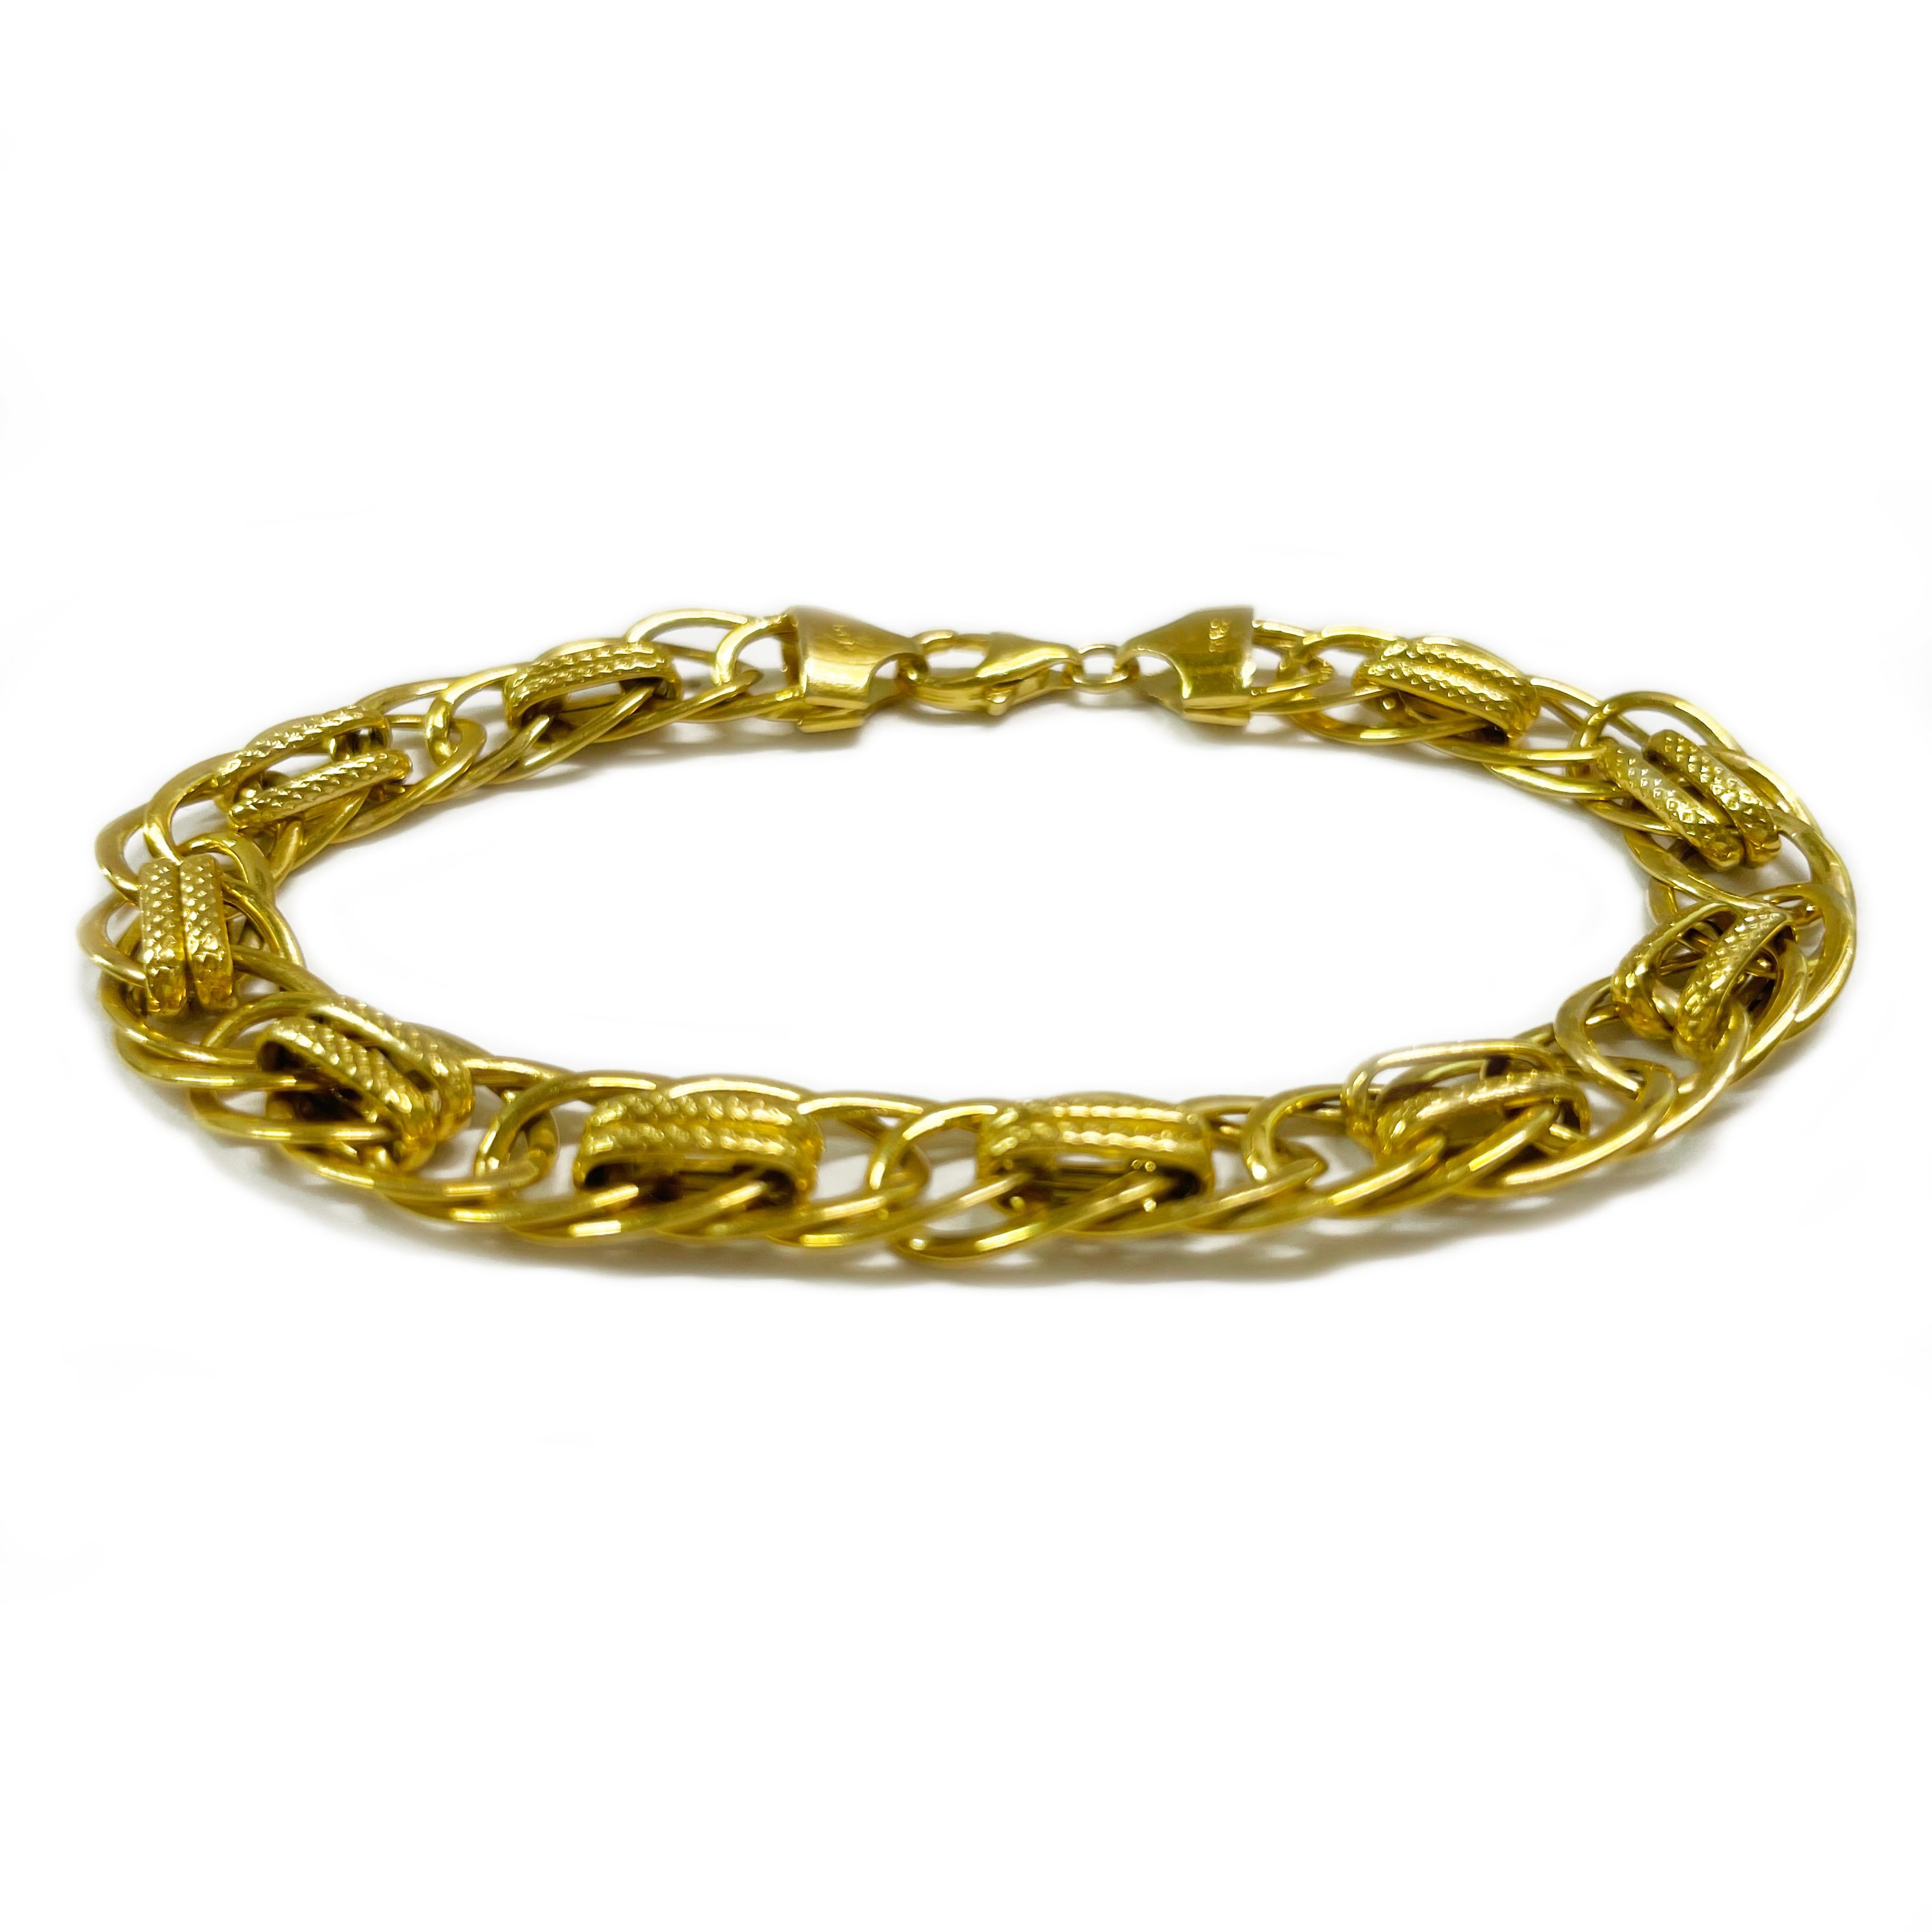 14 Karat Yellow Gold Interlocking Curb Link Bracelet. The hollow lightweight bracelet features oval links with ten textured dual links. The bracelet is 8.5mm wide and 7